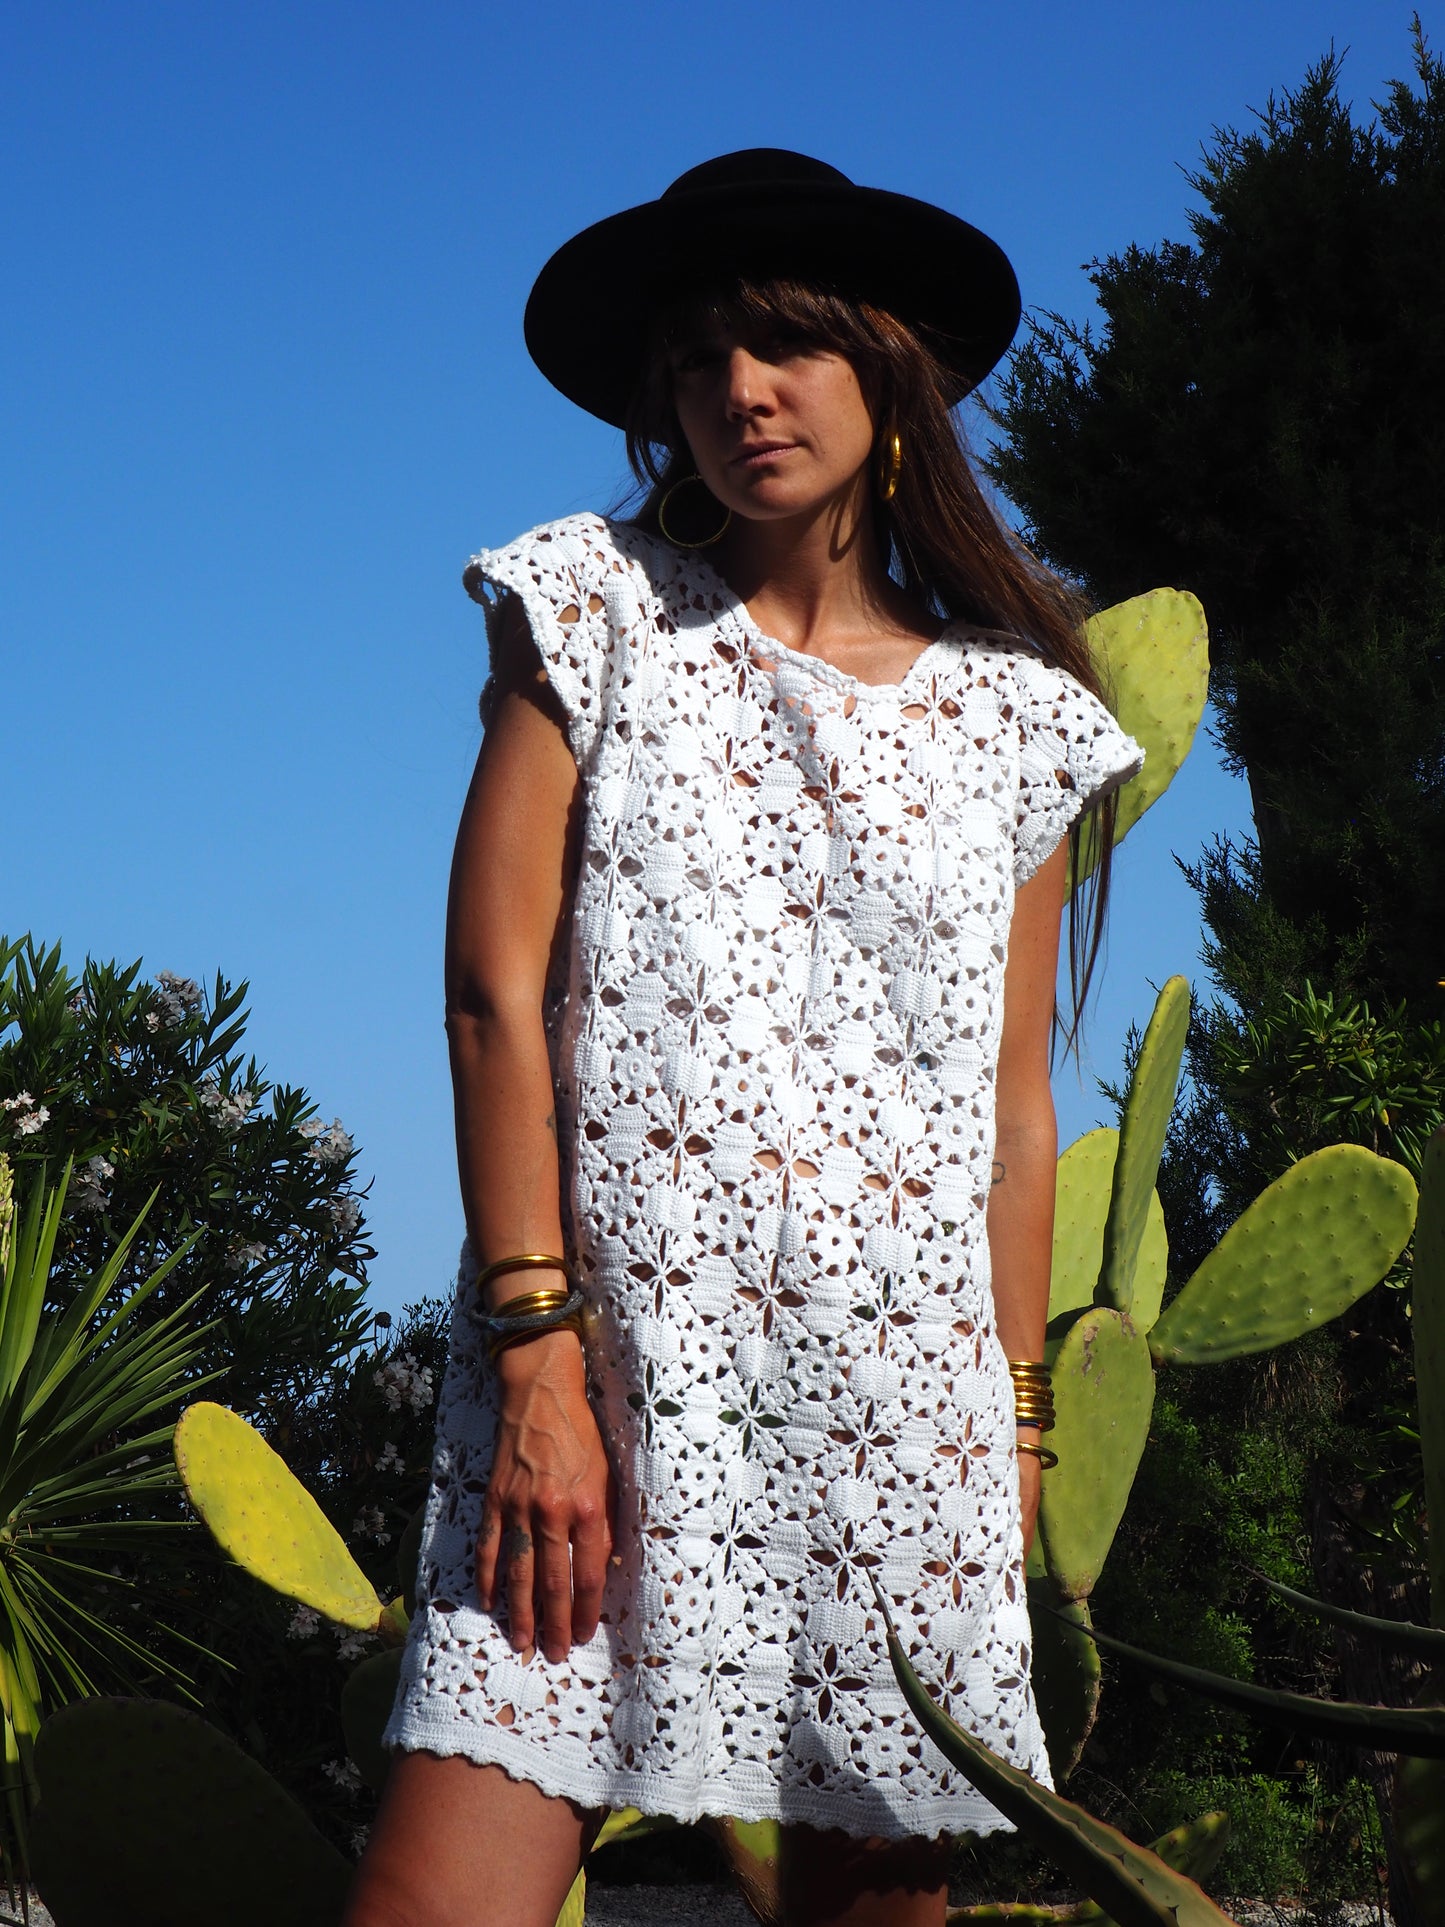 Super cute lace dress or beach cover up made from high quality antique lace crochet up-cycled by Vagabond Ibiza